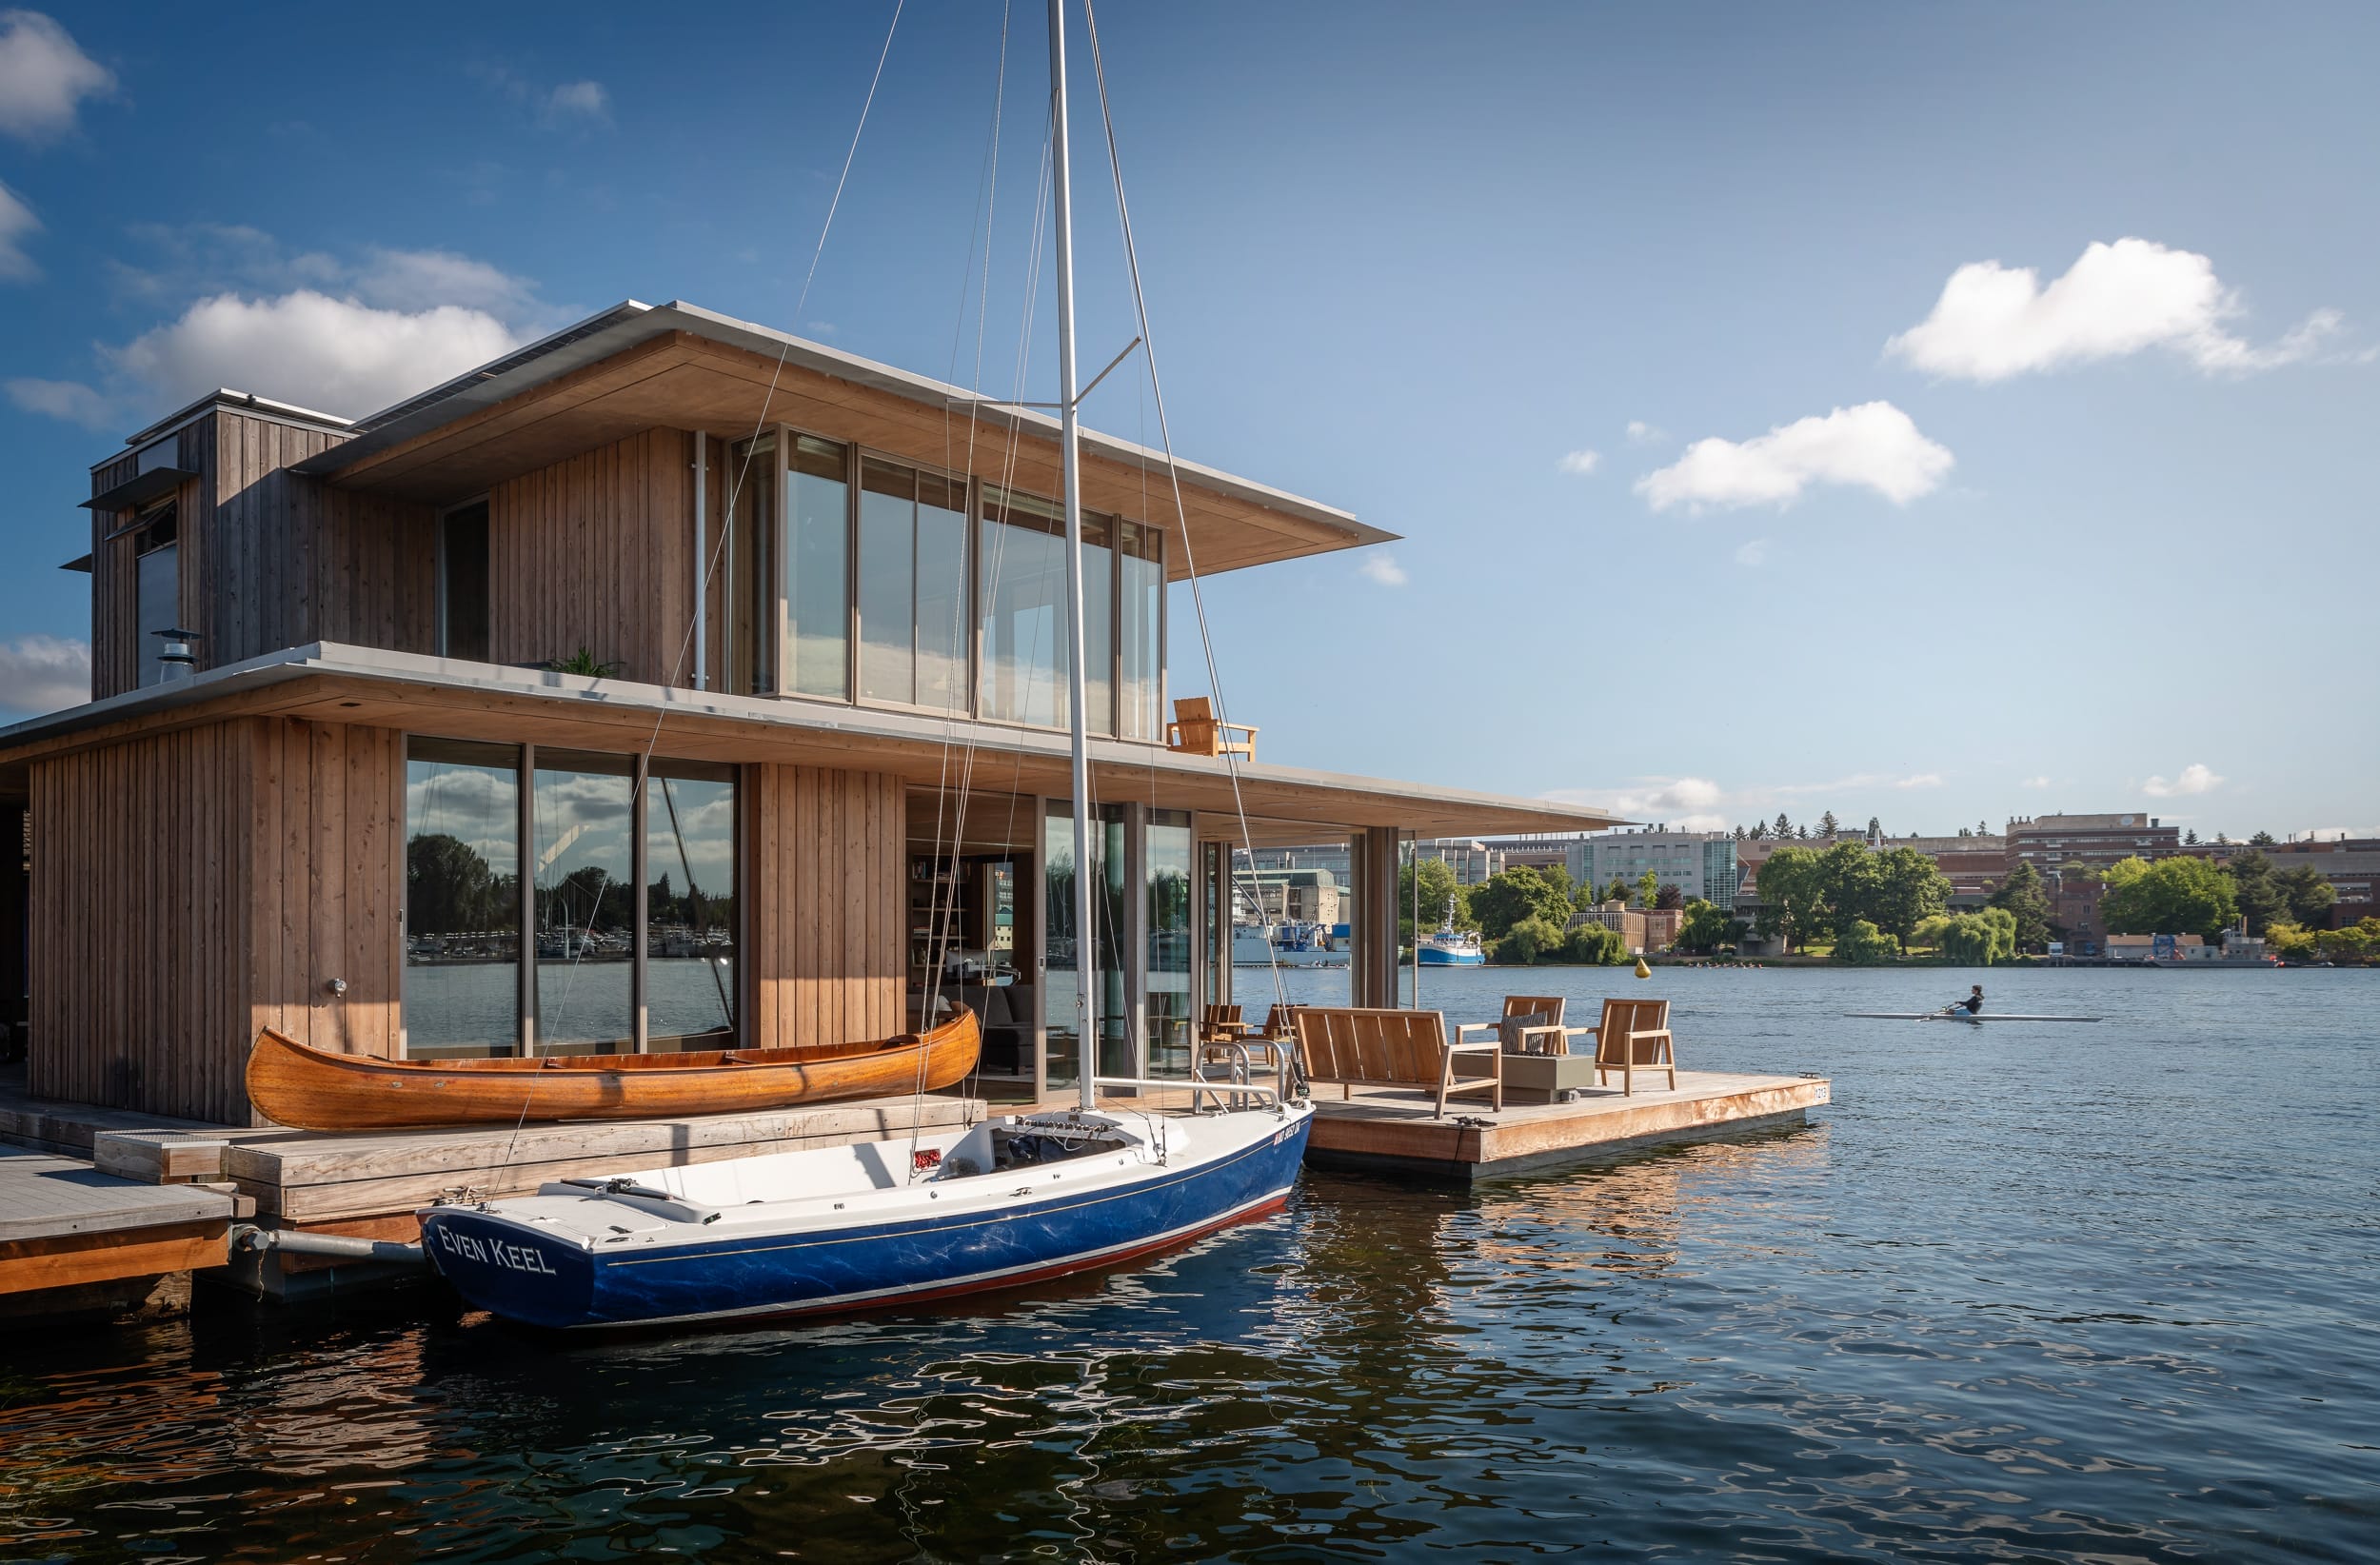 A modern floating home with a boat docked in the water.